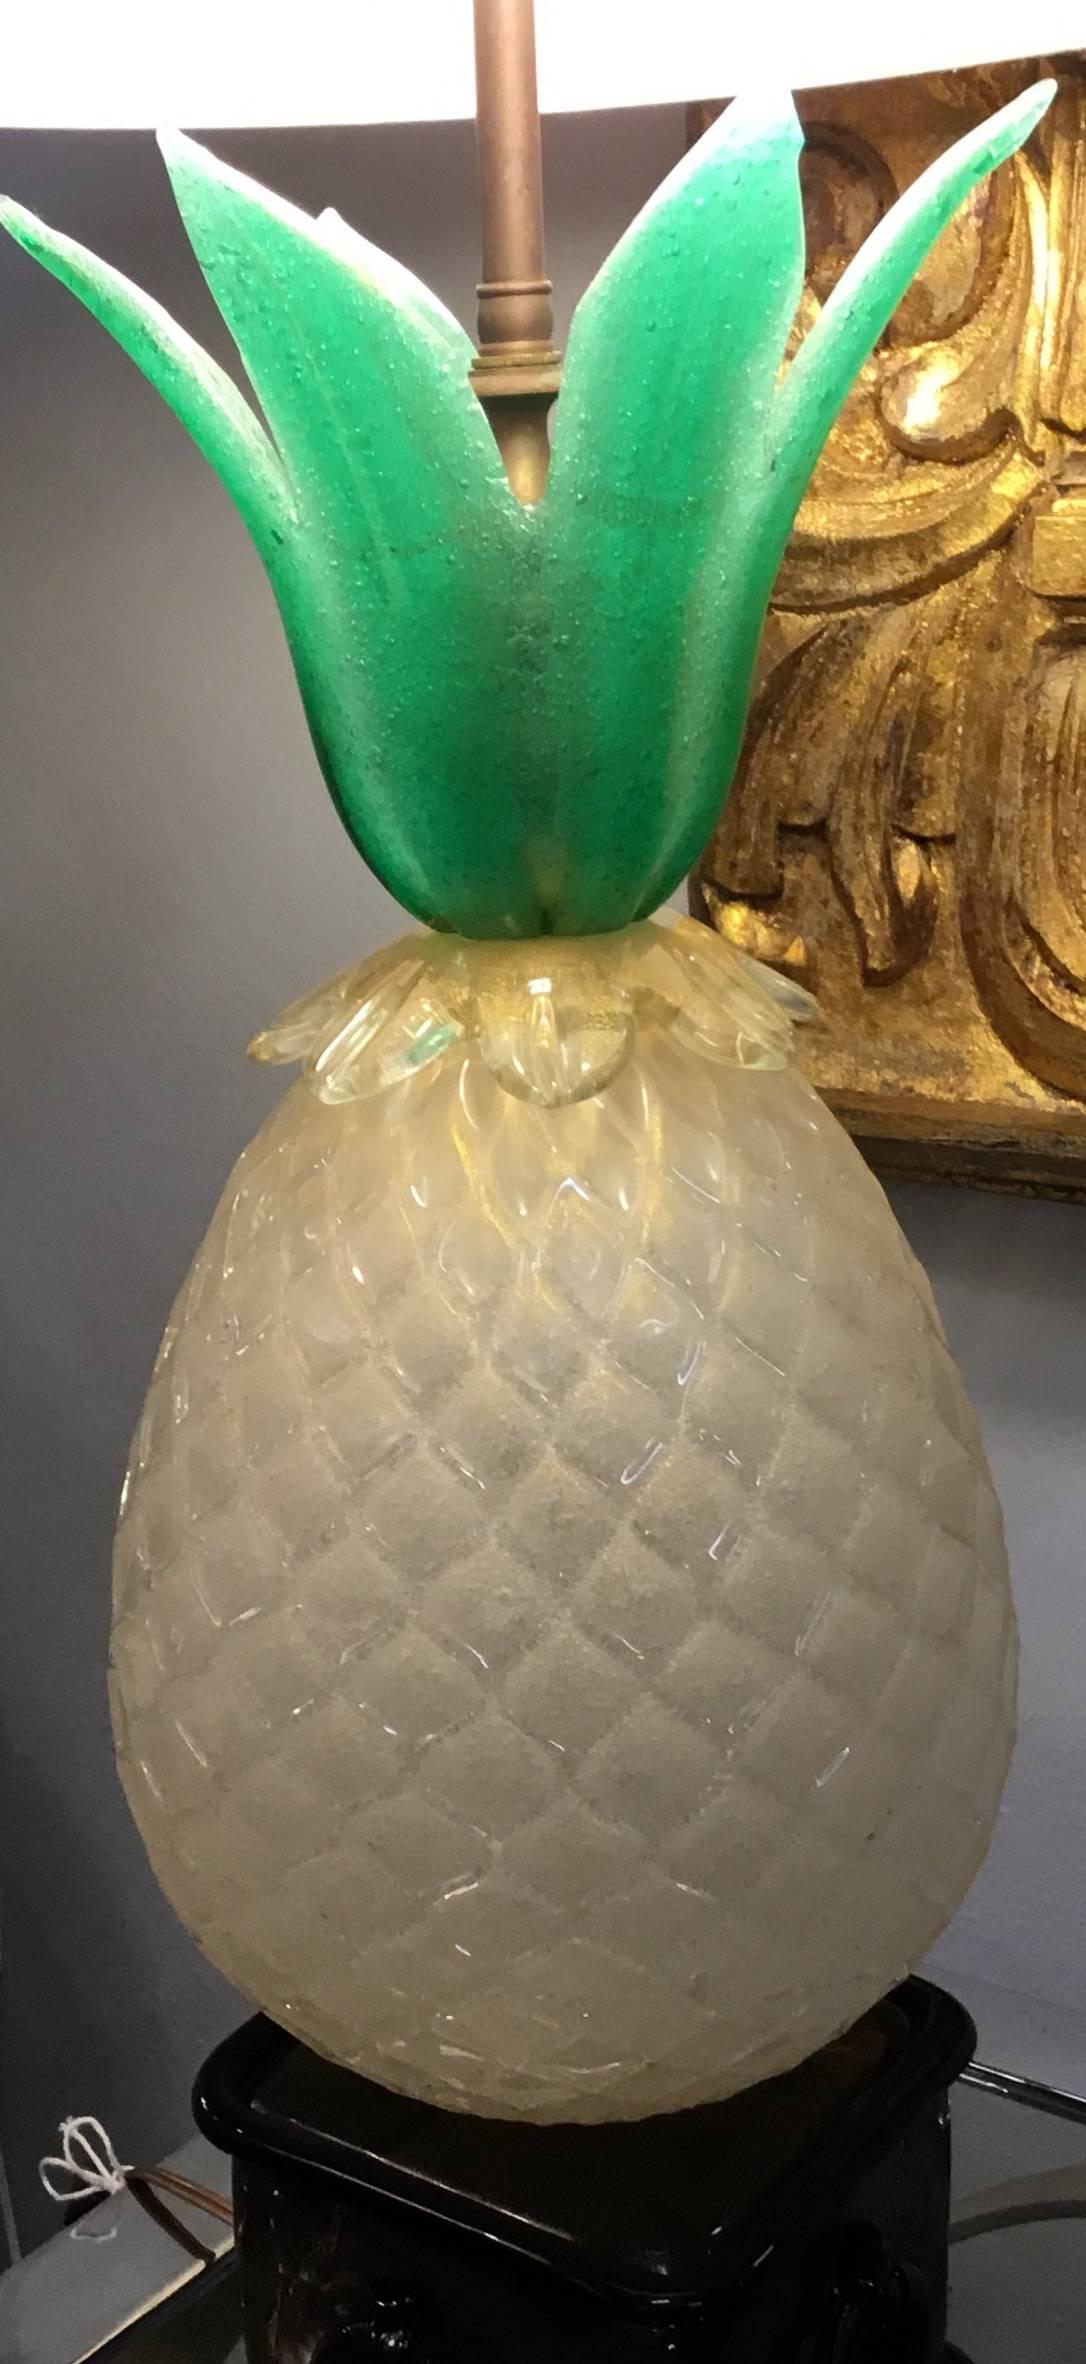 Rare Italian pineapple Murano glass table lamp by Barovier Toso, circa 1940s.
Electrified and ready to light. 
One of a kind.

Total height bottom to finial 37".